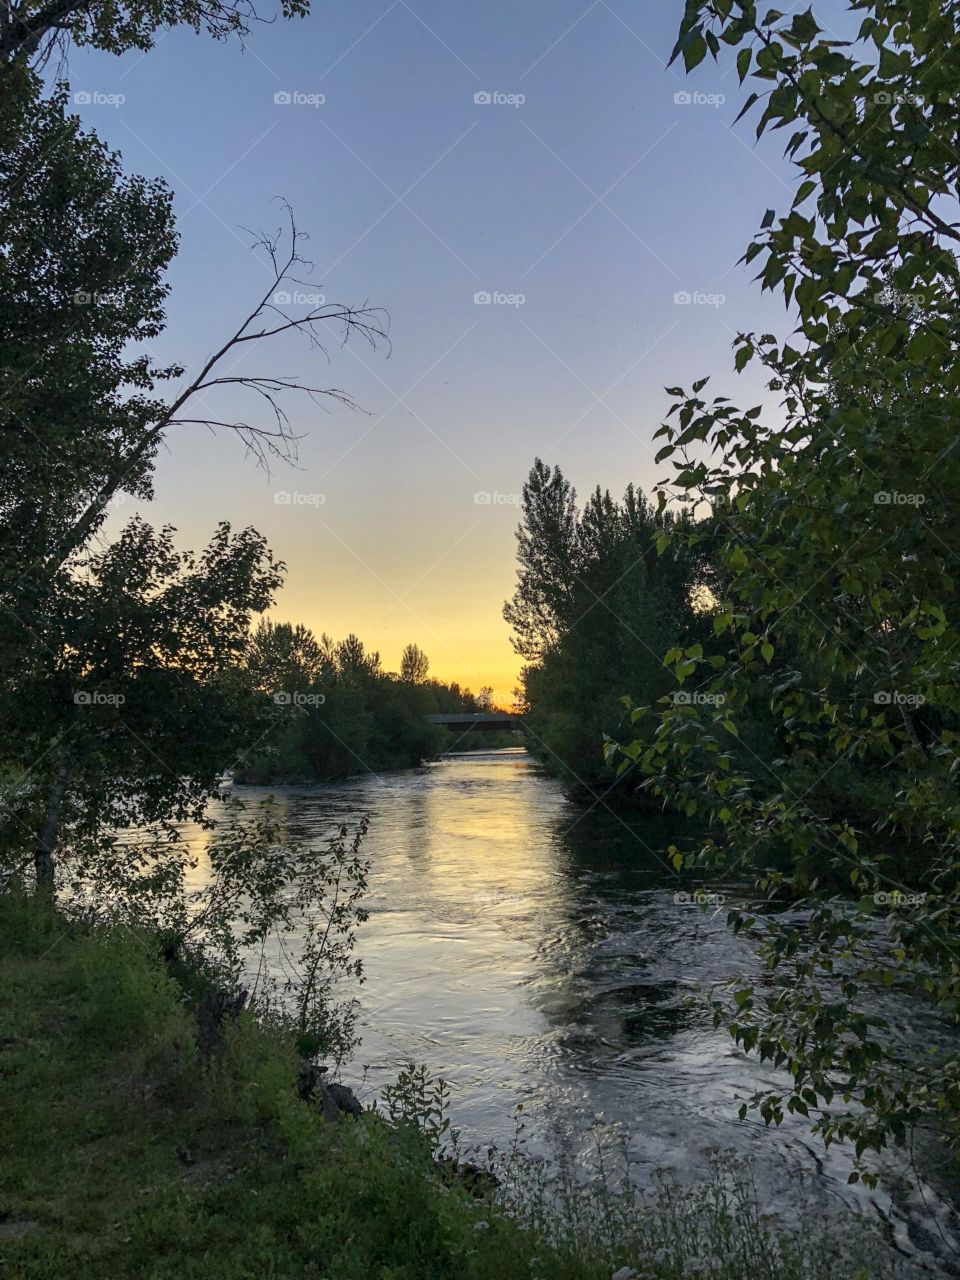 Sunset on the shore of the beautiful Boise River